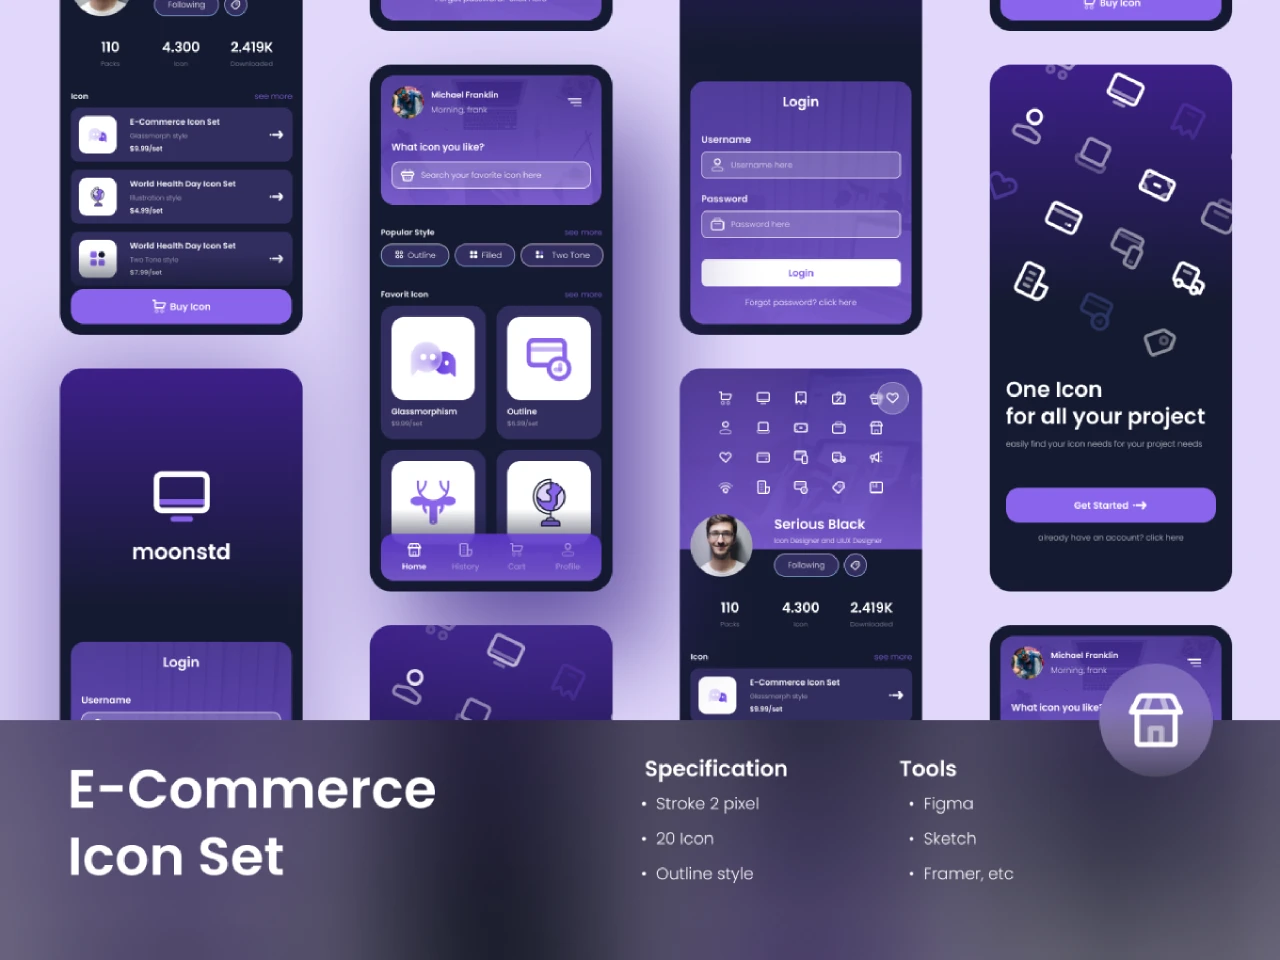 E-Commerce Icon Set Outline Style for Figma and Adobe XD